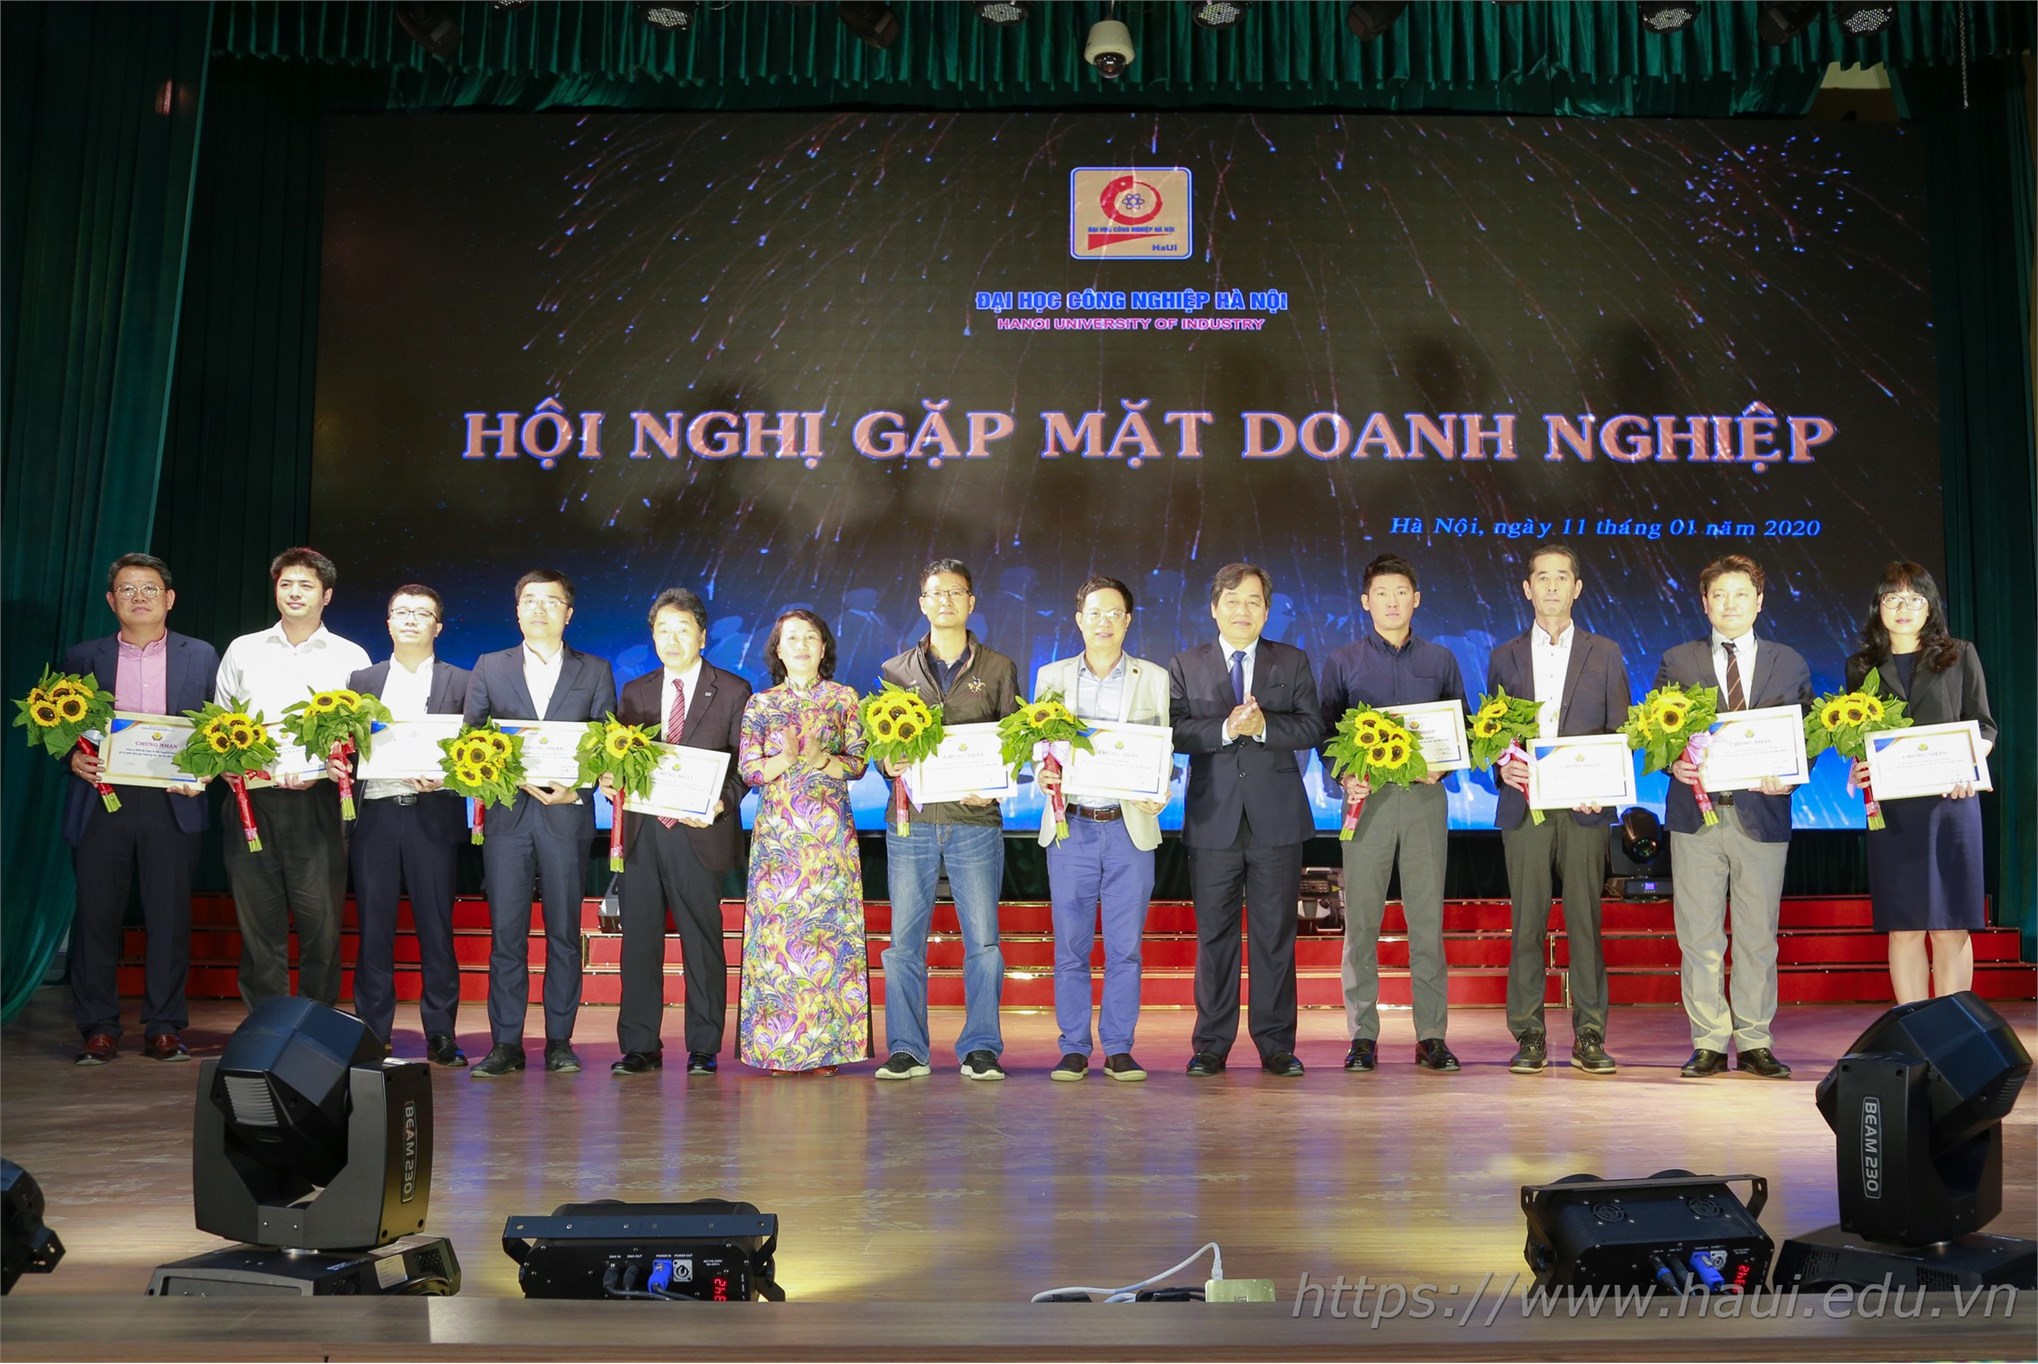 Hanoi University of Industry hosts a conference to meet more than 100 enterprises